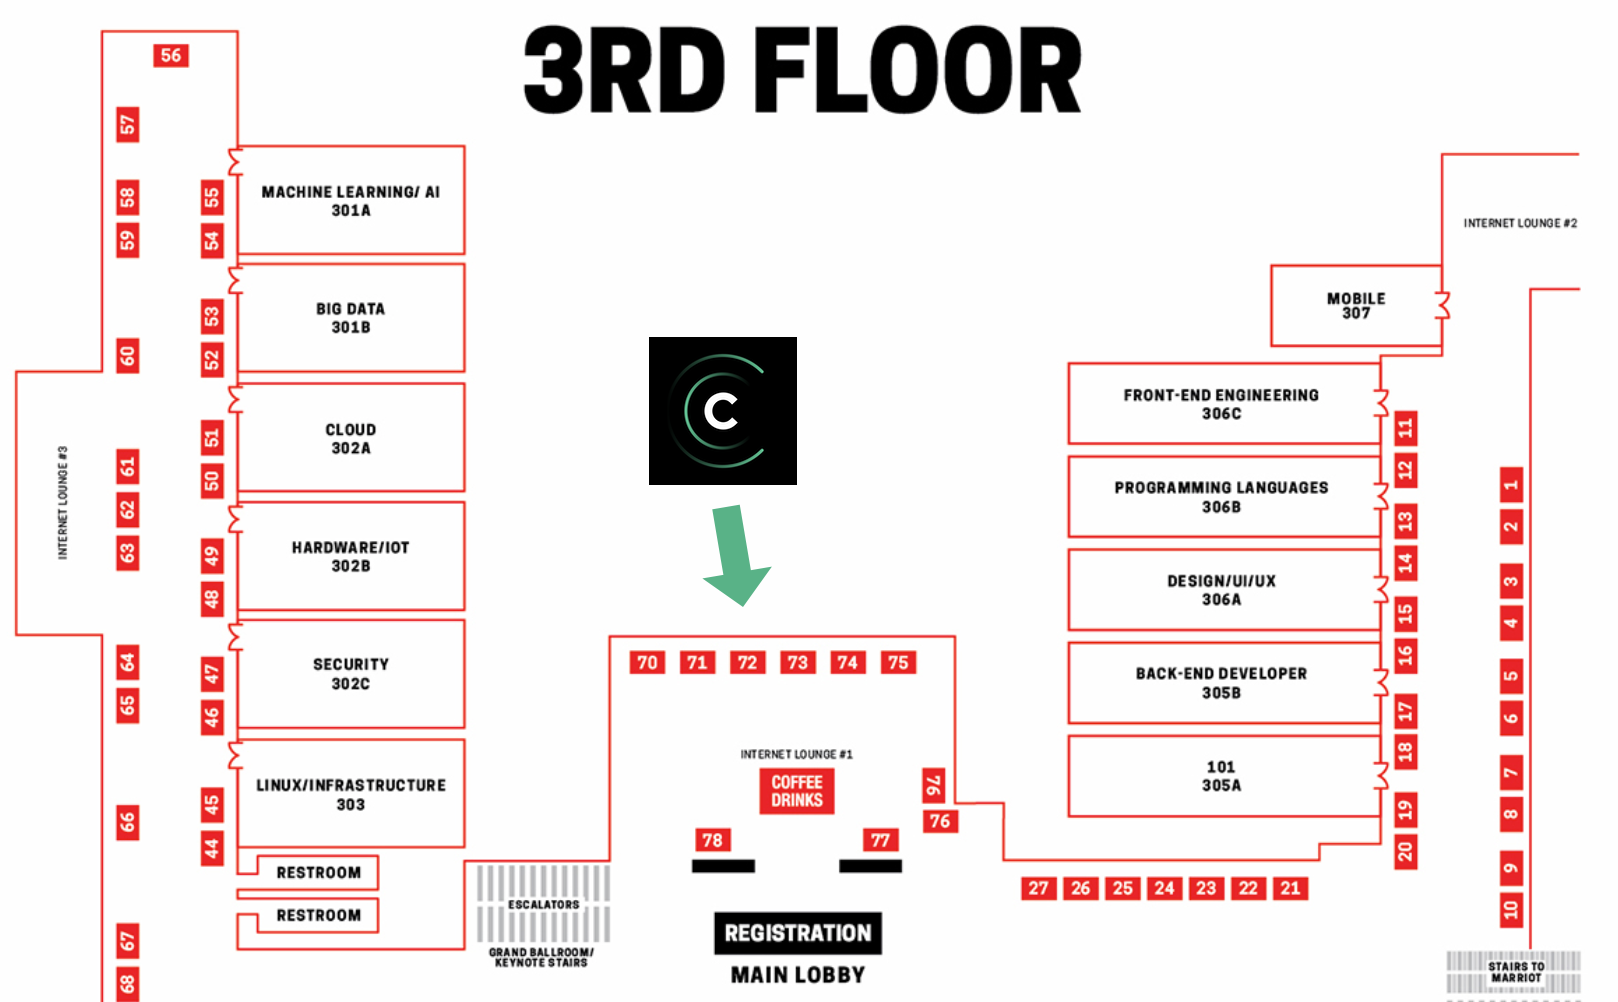 All Things Open 2019 booth layout